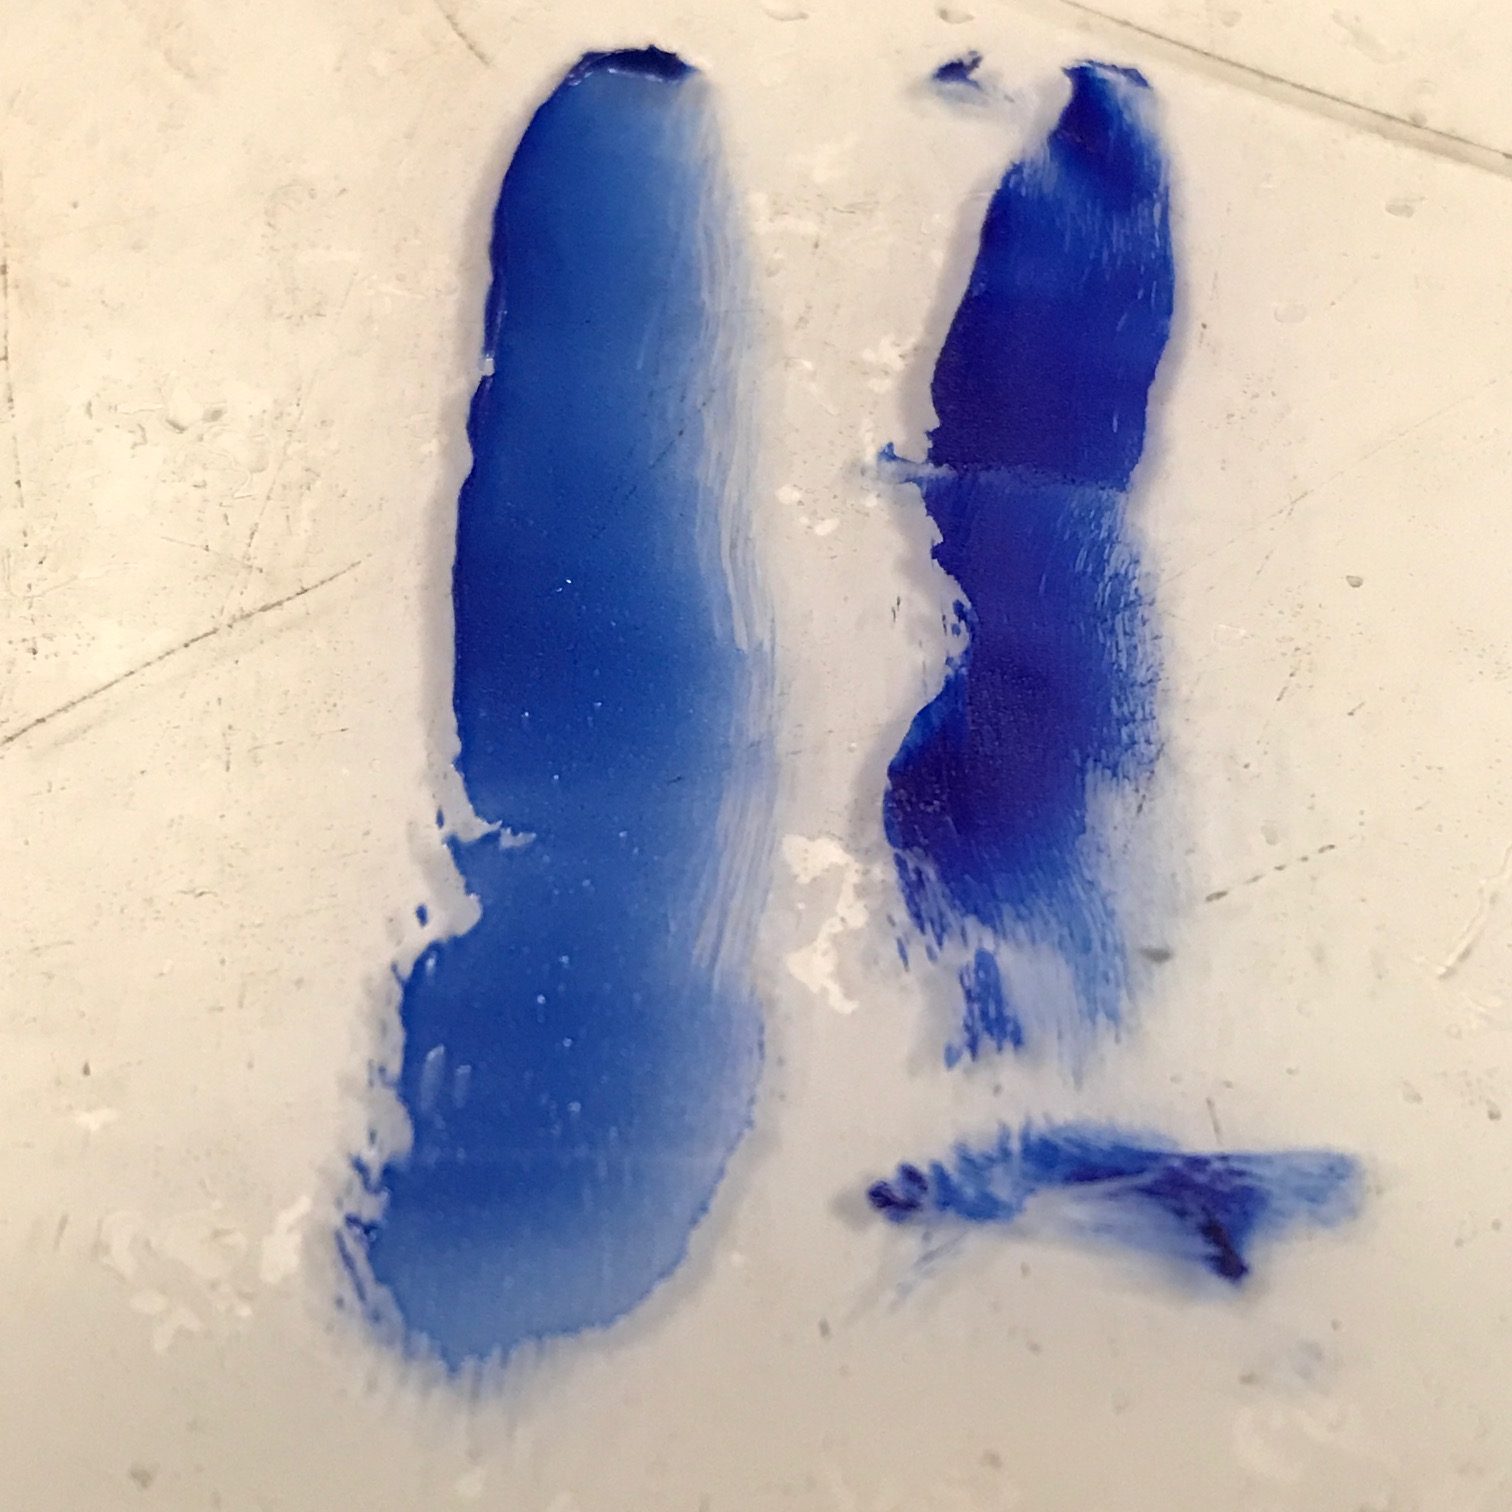 Genuine Ultramarine made from Lapis Lazuli (left), compared with modern synthetic Ultramarine (right)